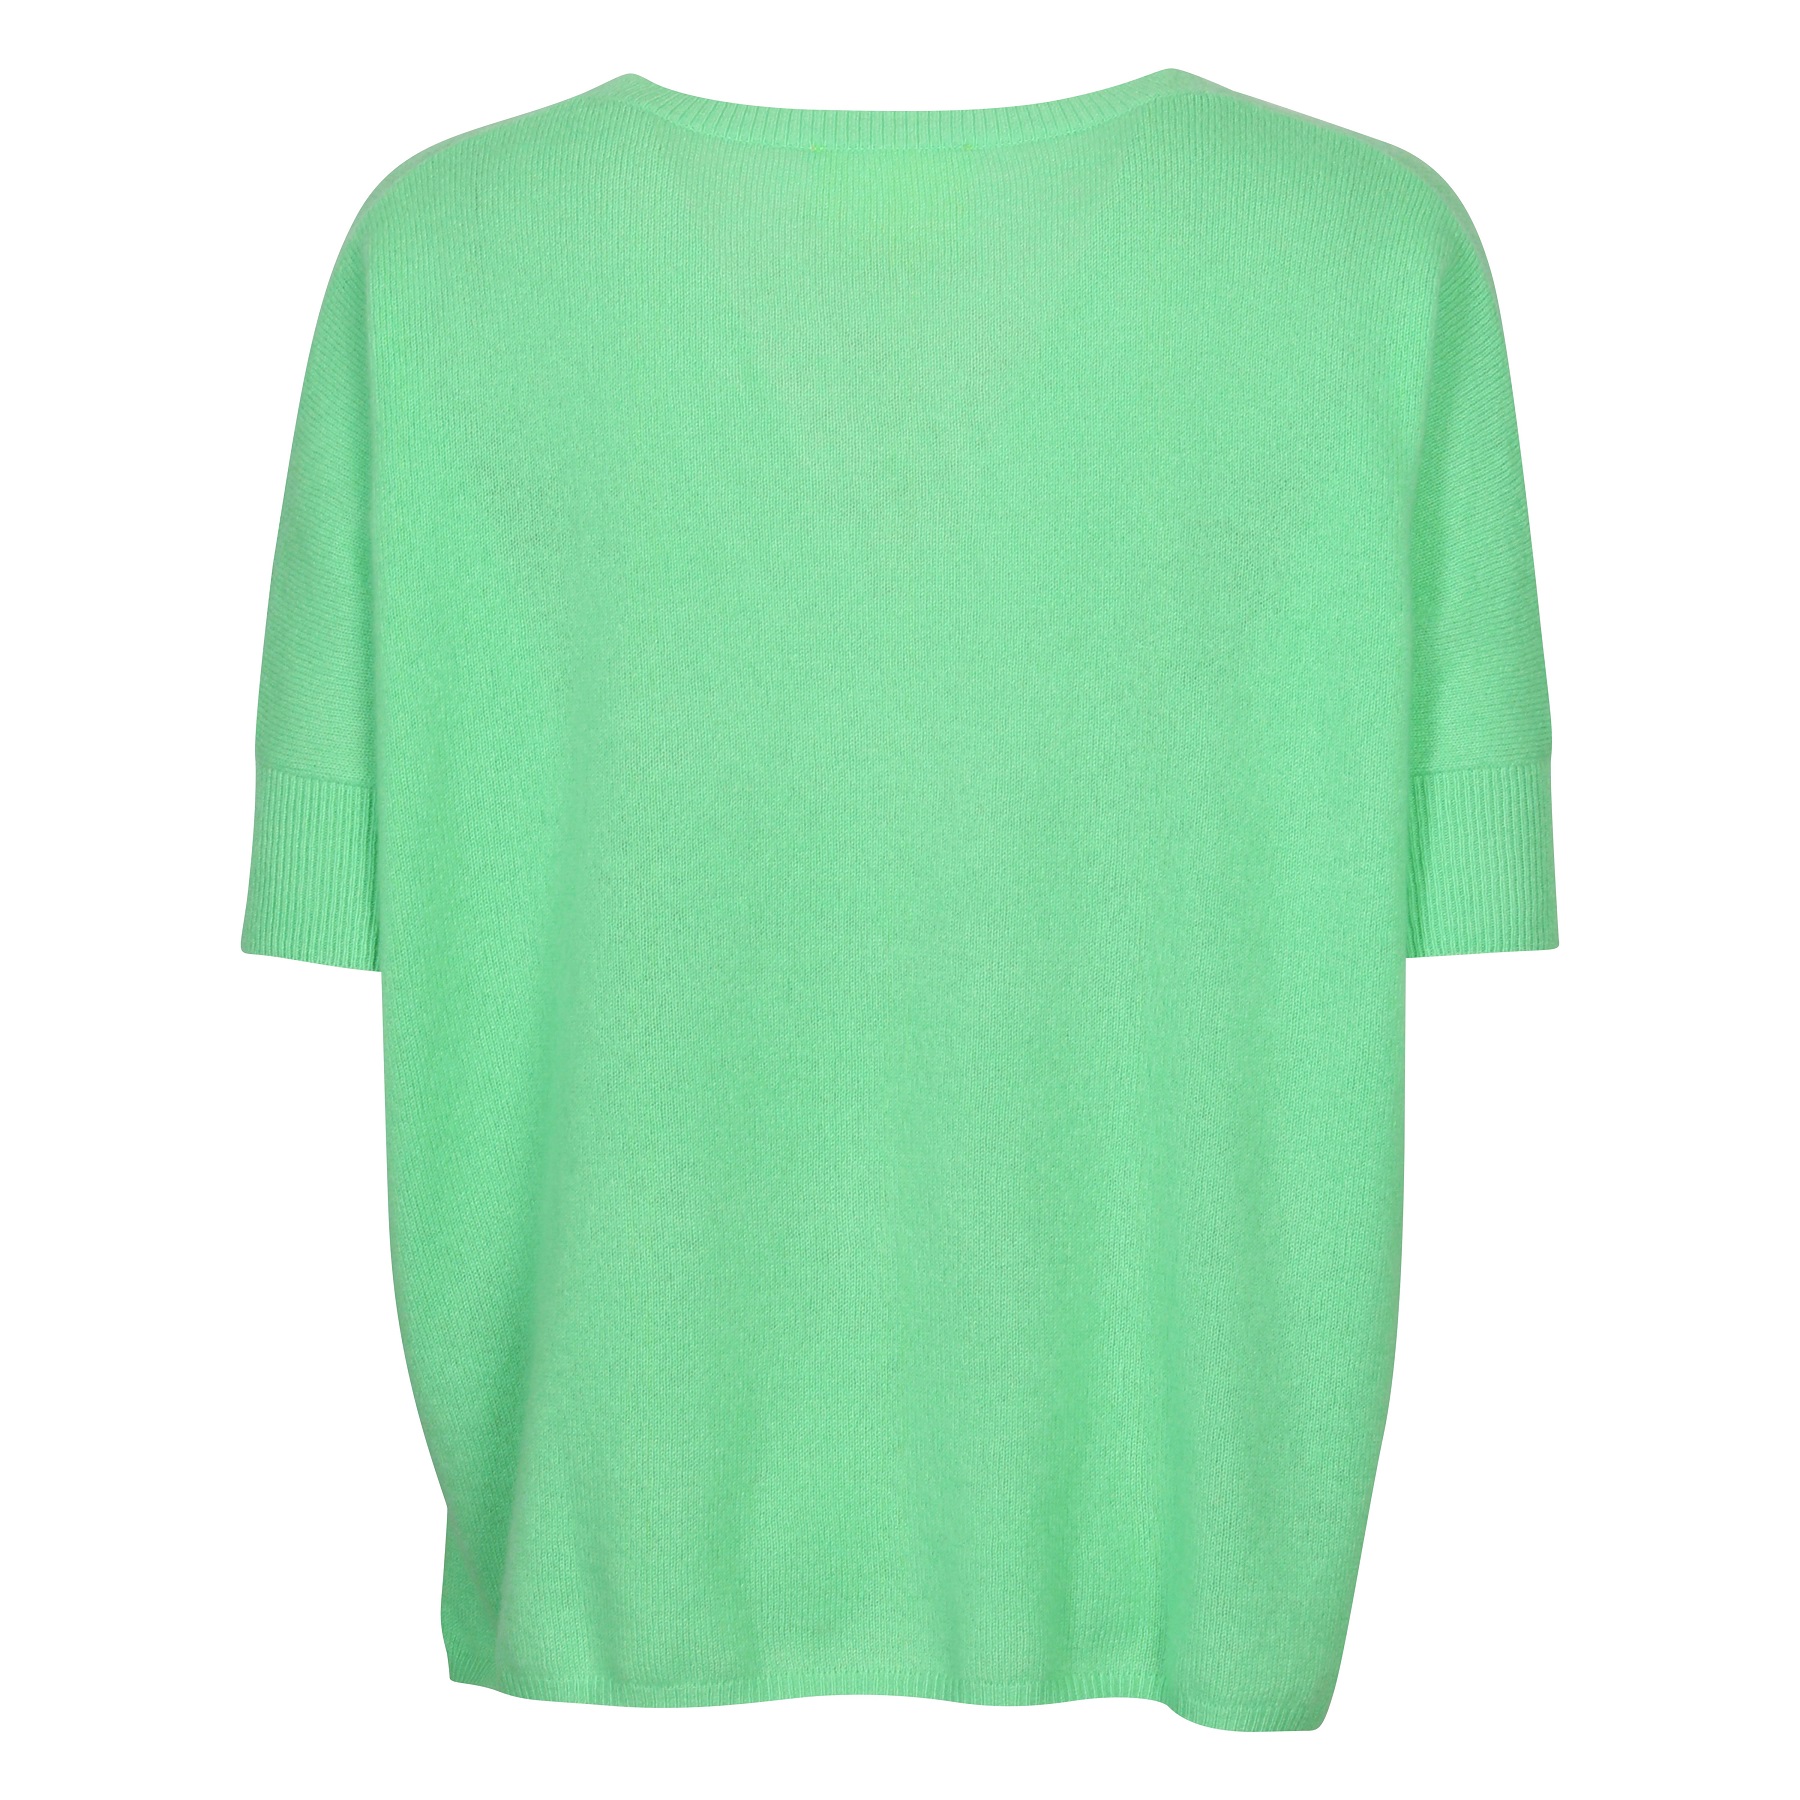 Absolut Cashmere Poncho Kate in Light Green M